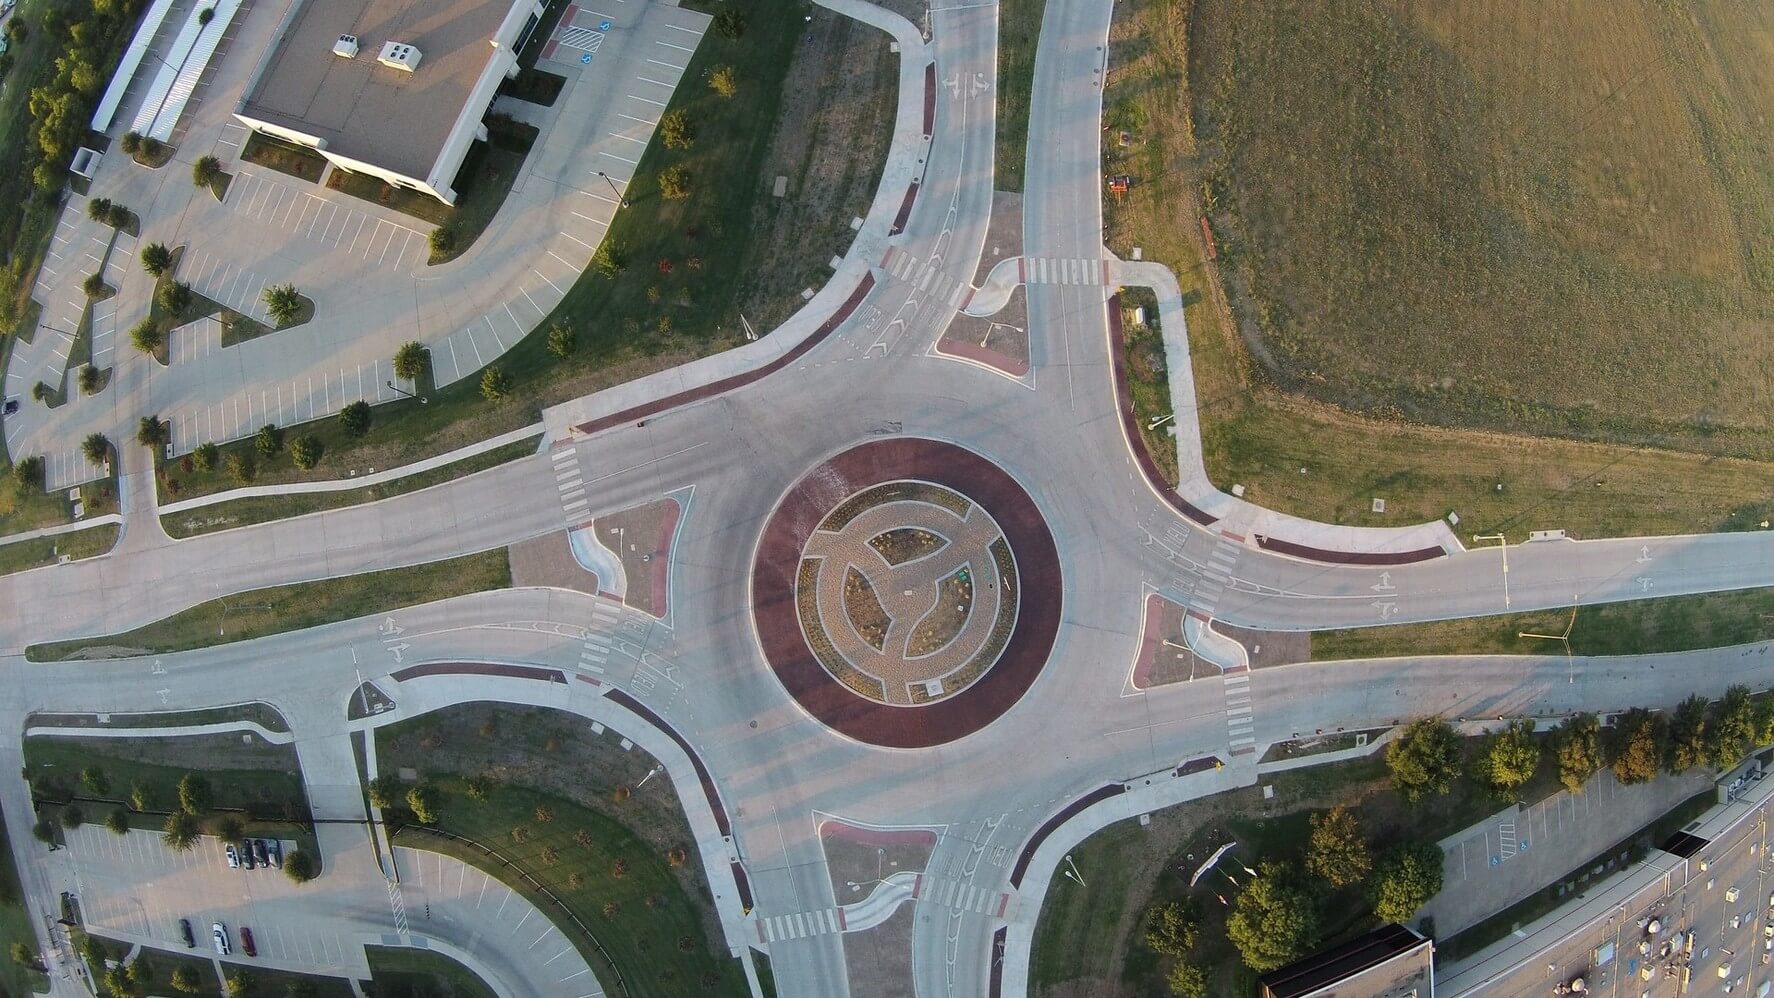 Roundabout Design and Engineering